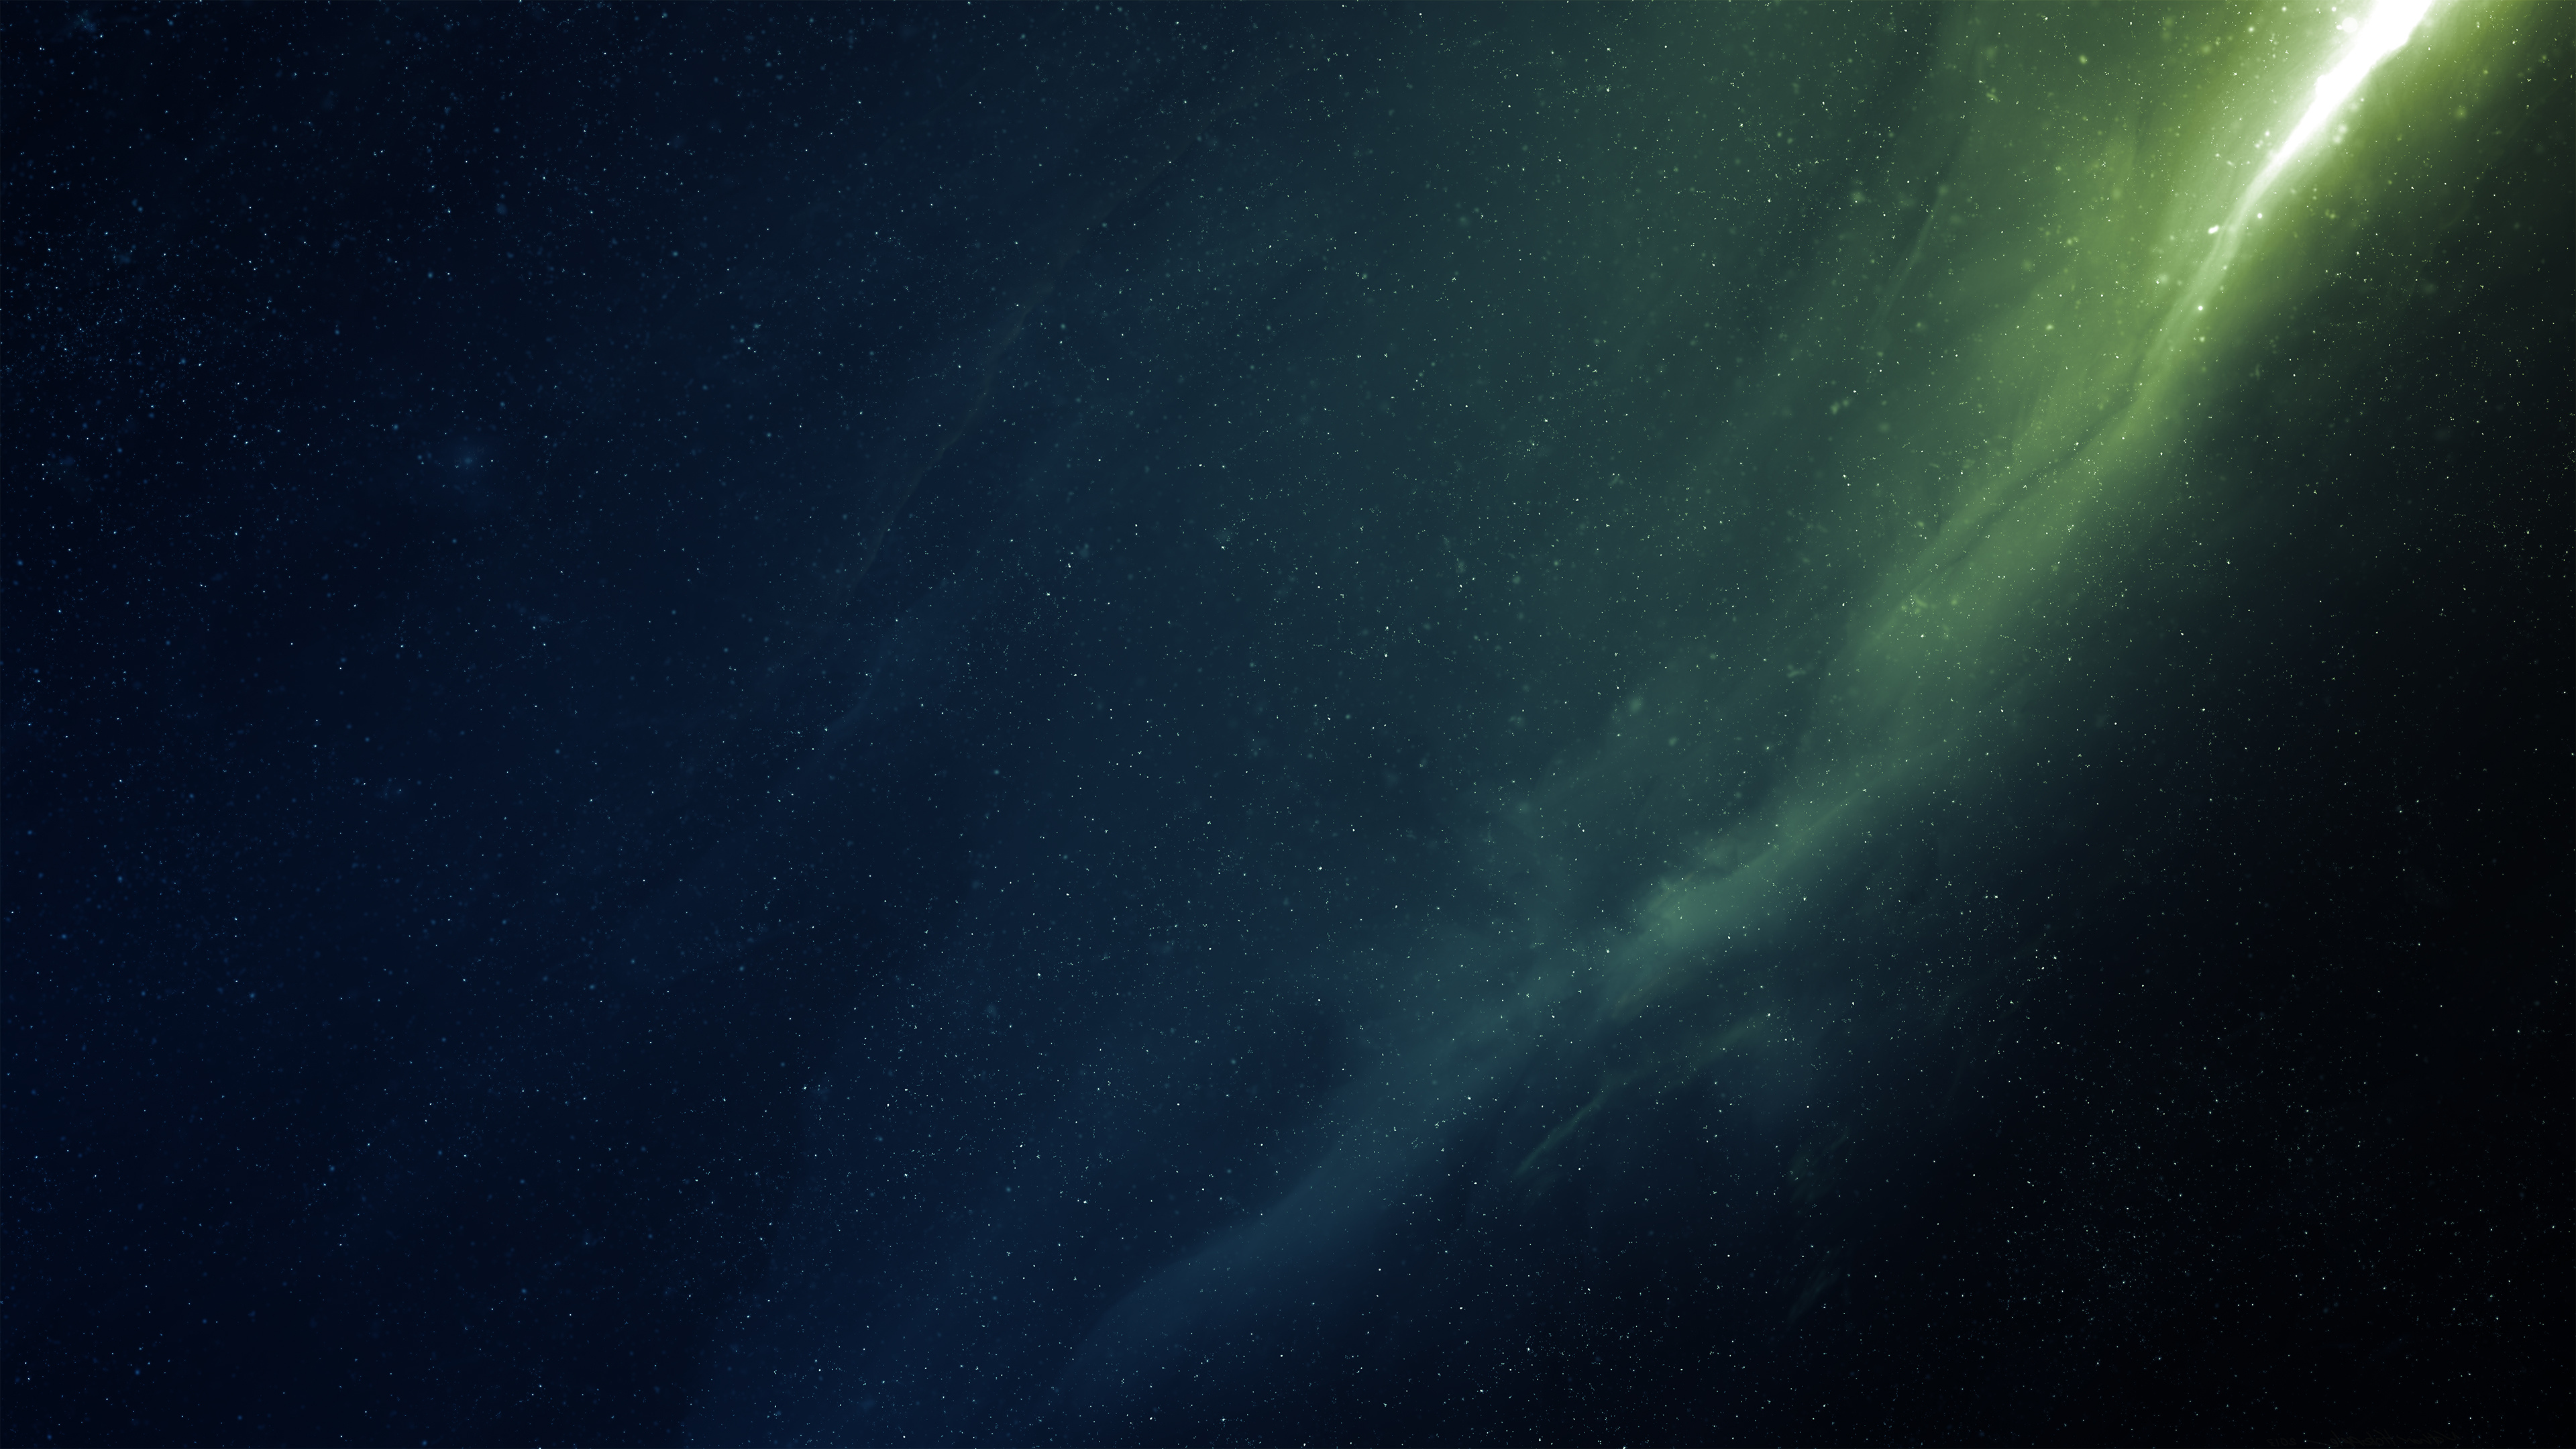 Green Nebula: The star-forming region, The formations of gas, dust, and other materials clump together to form denser regions. 3840x2160 4K Wallpaper.